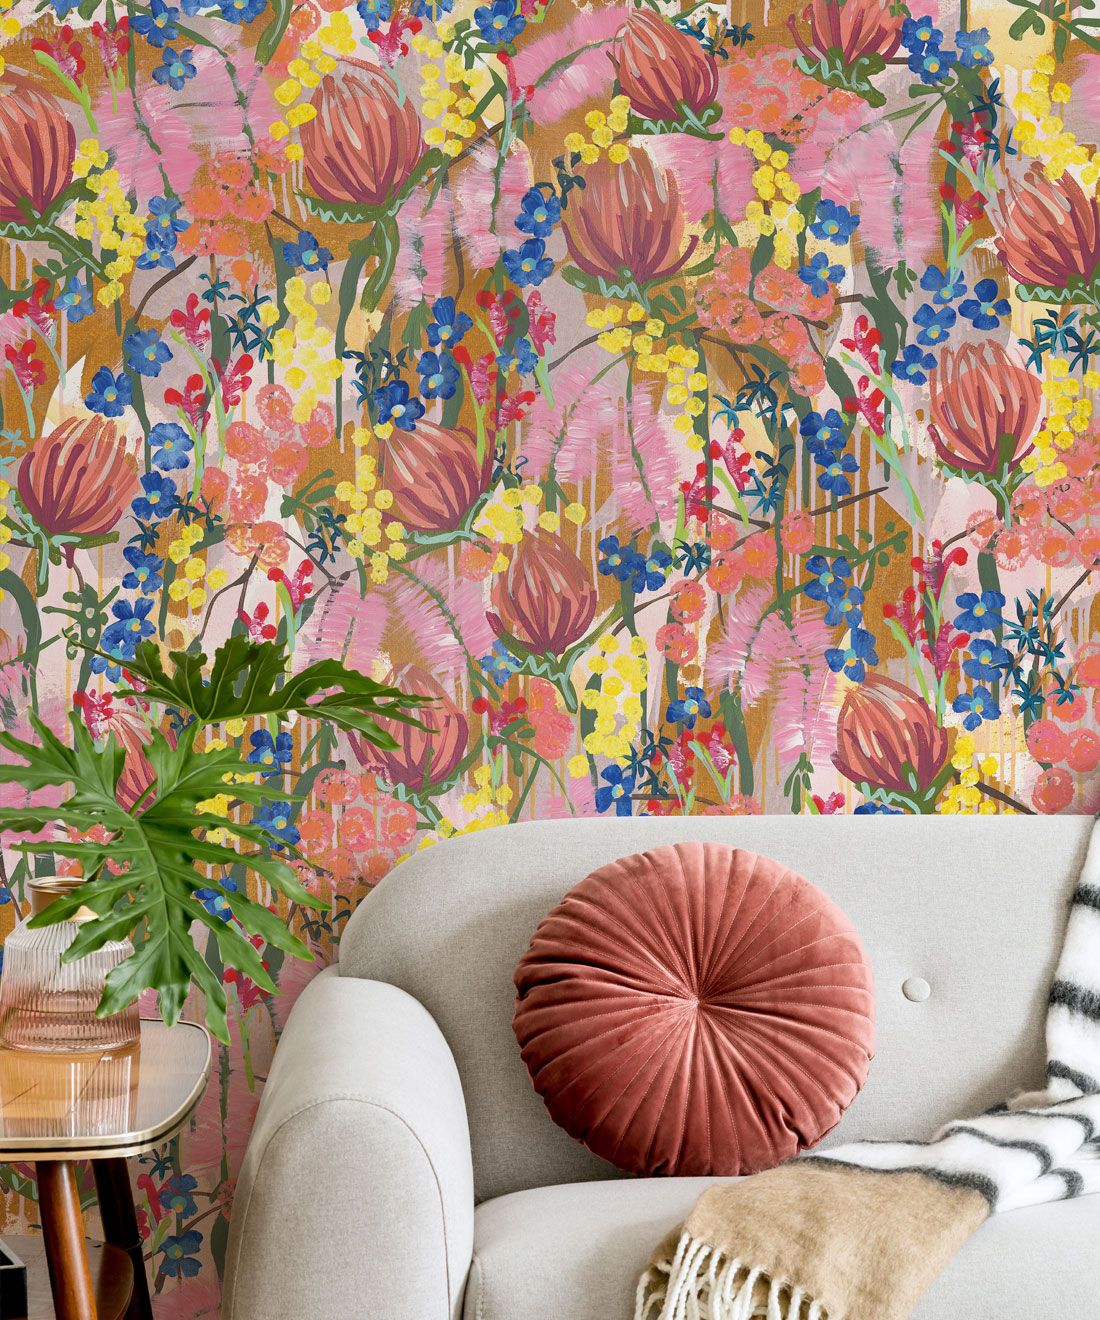 Acacia Wallpaper • Colorful Floral Wallpaper • Tiff Manuell • Abstract Expressionist Wallpaper • Insitu